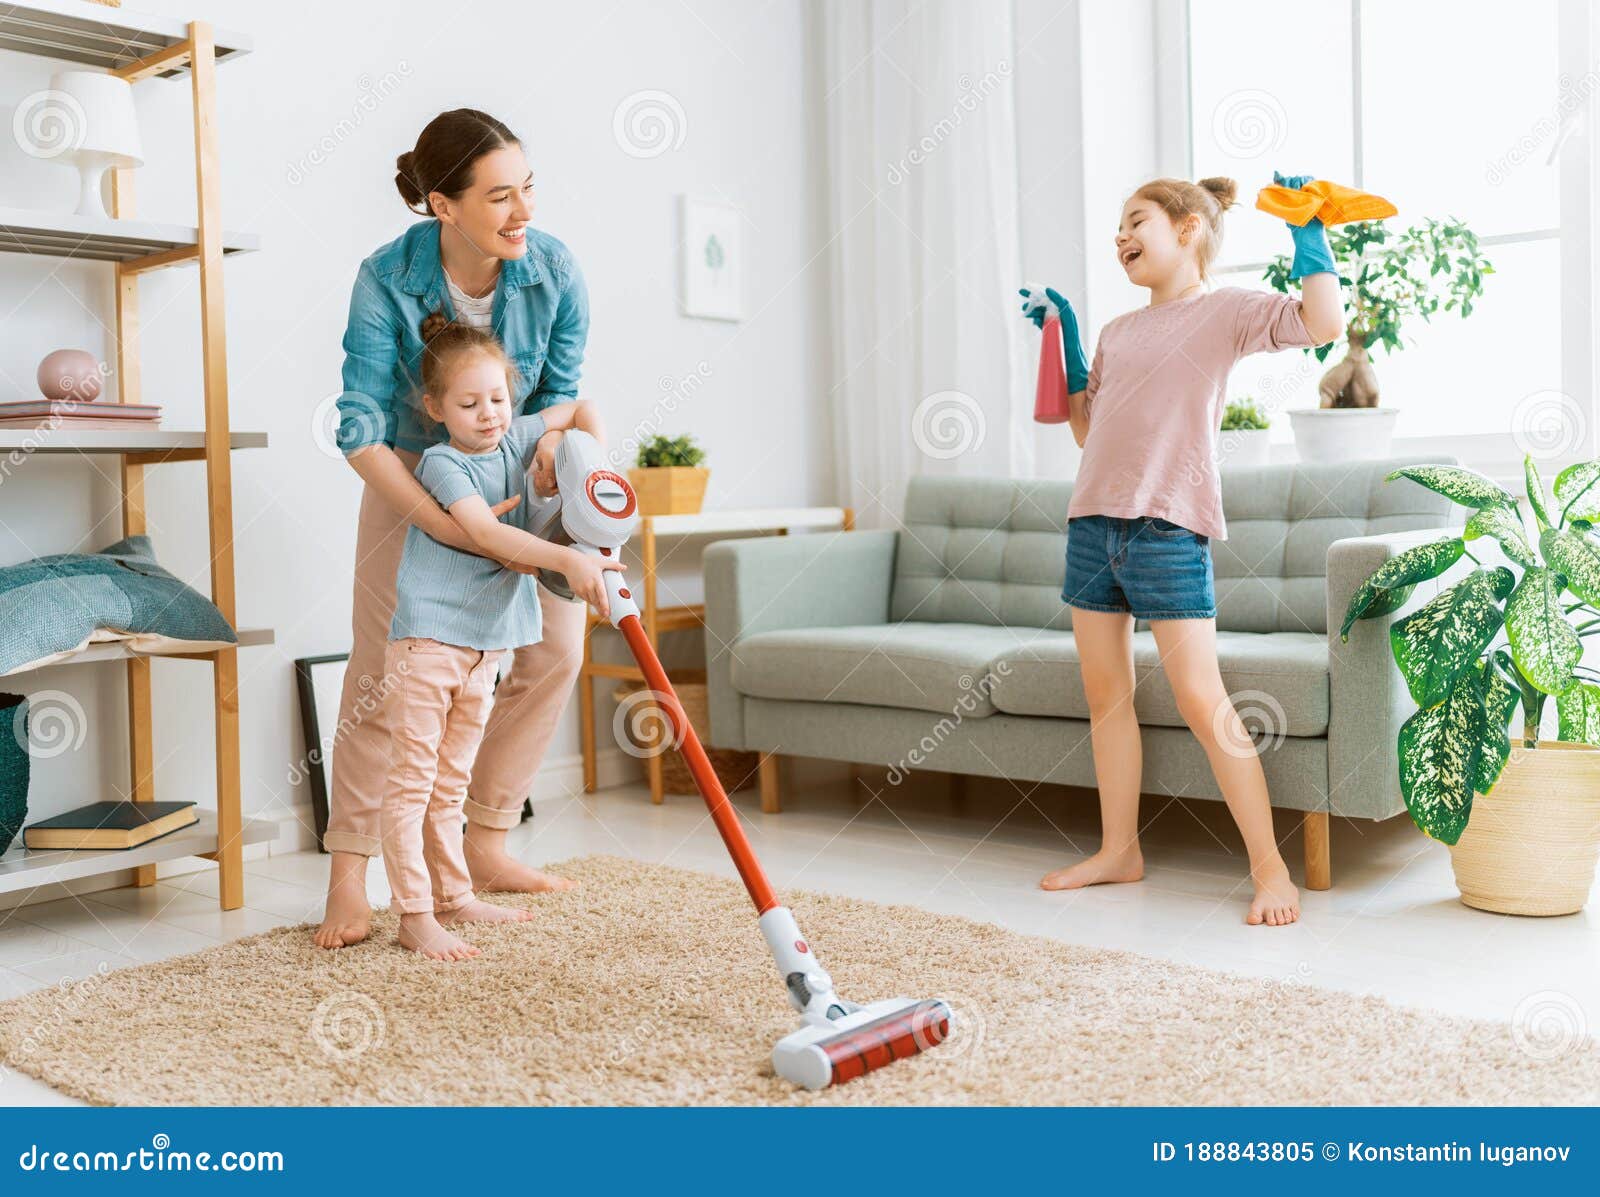 Family cleaning the room stock image. Image of housecleaning - 188843805